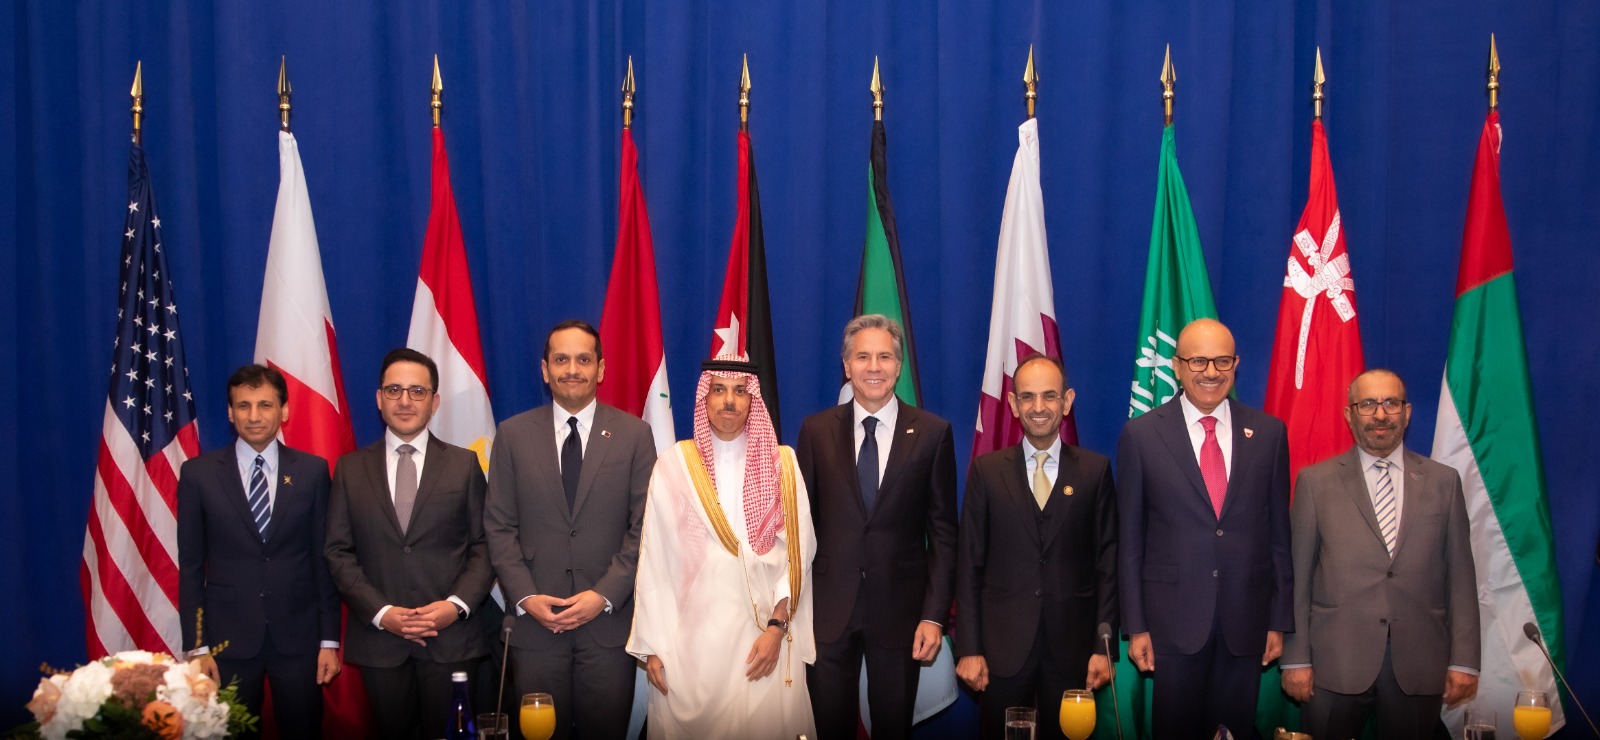 Deputy Prime Minister and Minister of Foreign Affairs Participates in Meeting of Foreign Ministers of GCC, Egypt, Iraq, Jordan with US Counterpart